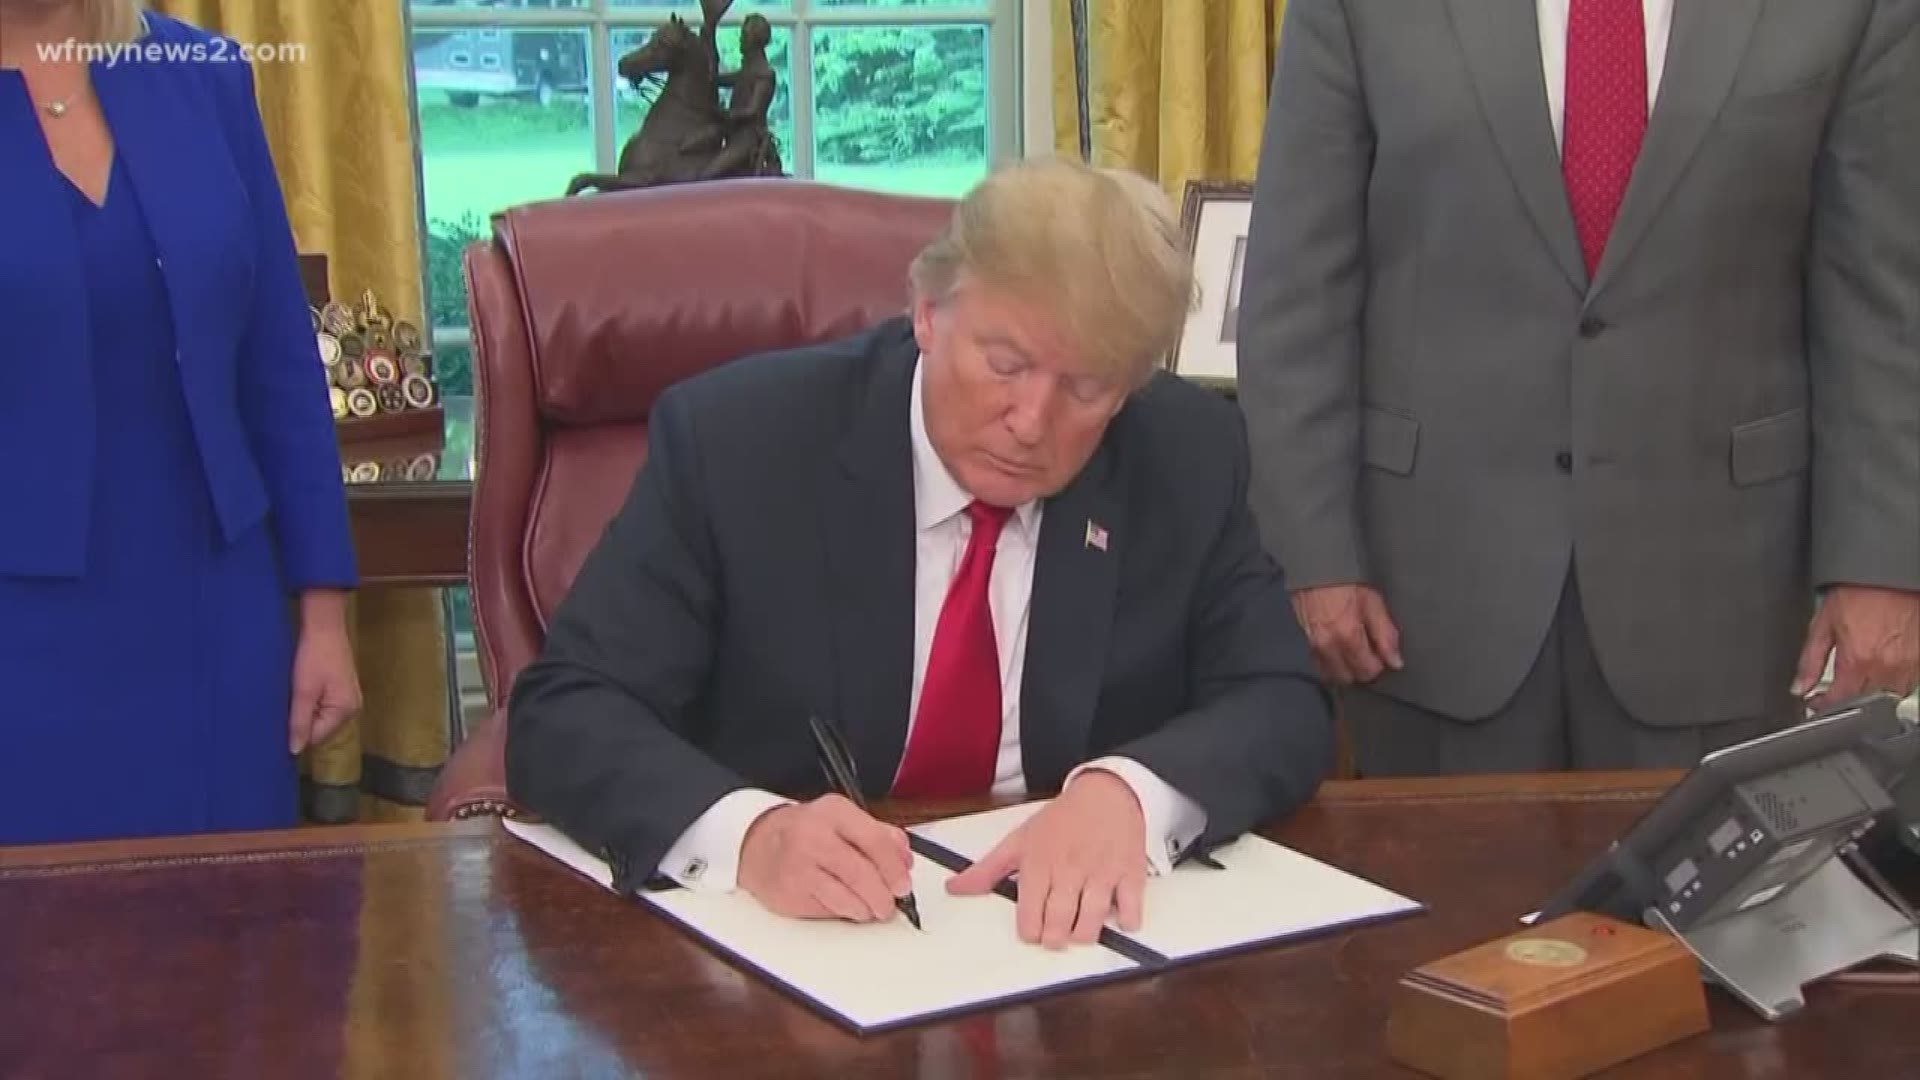 Trump Signs Order On Separated Children